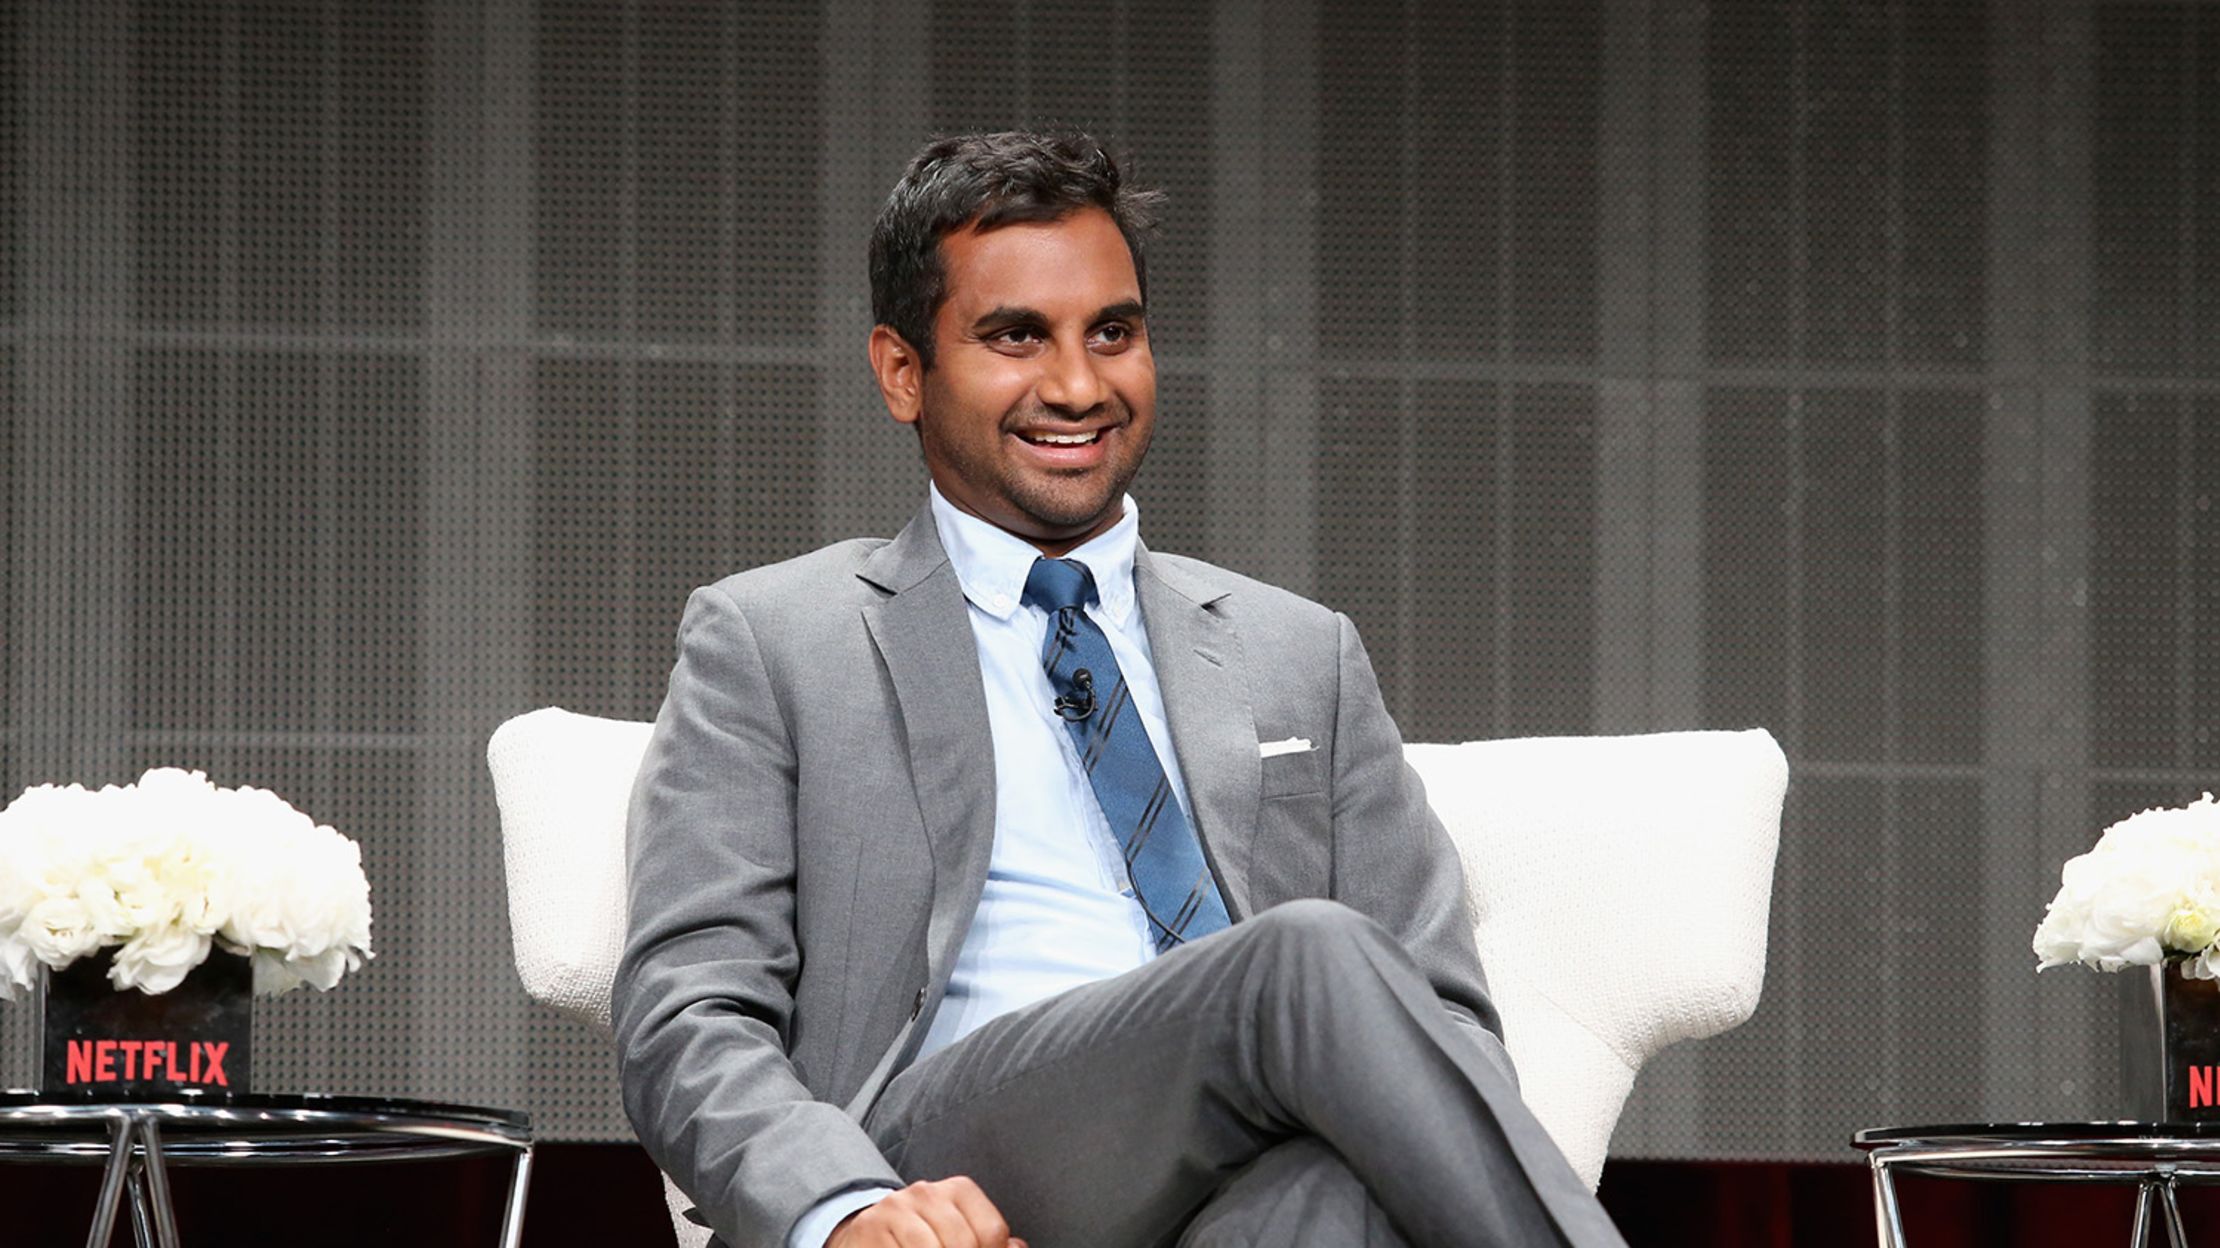 What Would Happen if Aziz Narrated a BBC Program? | Mental Floss